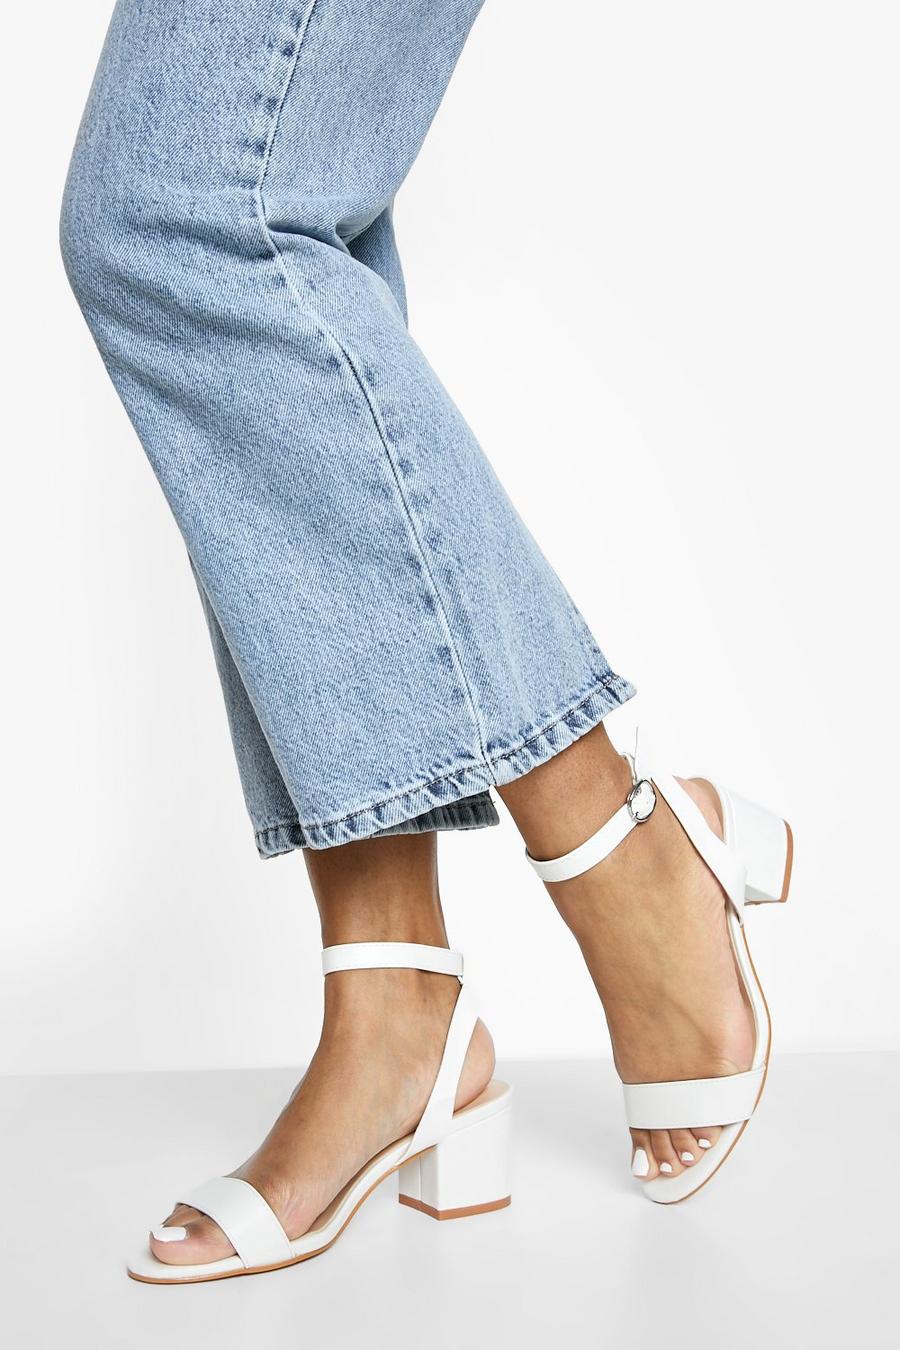 White blanco Low Block Barely There Heels